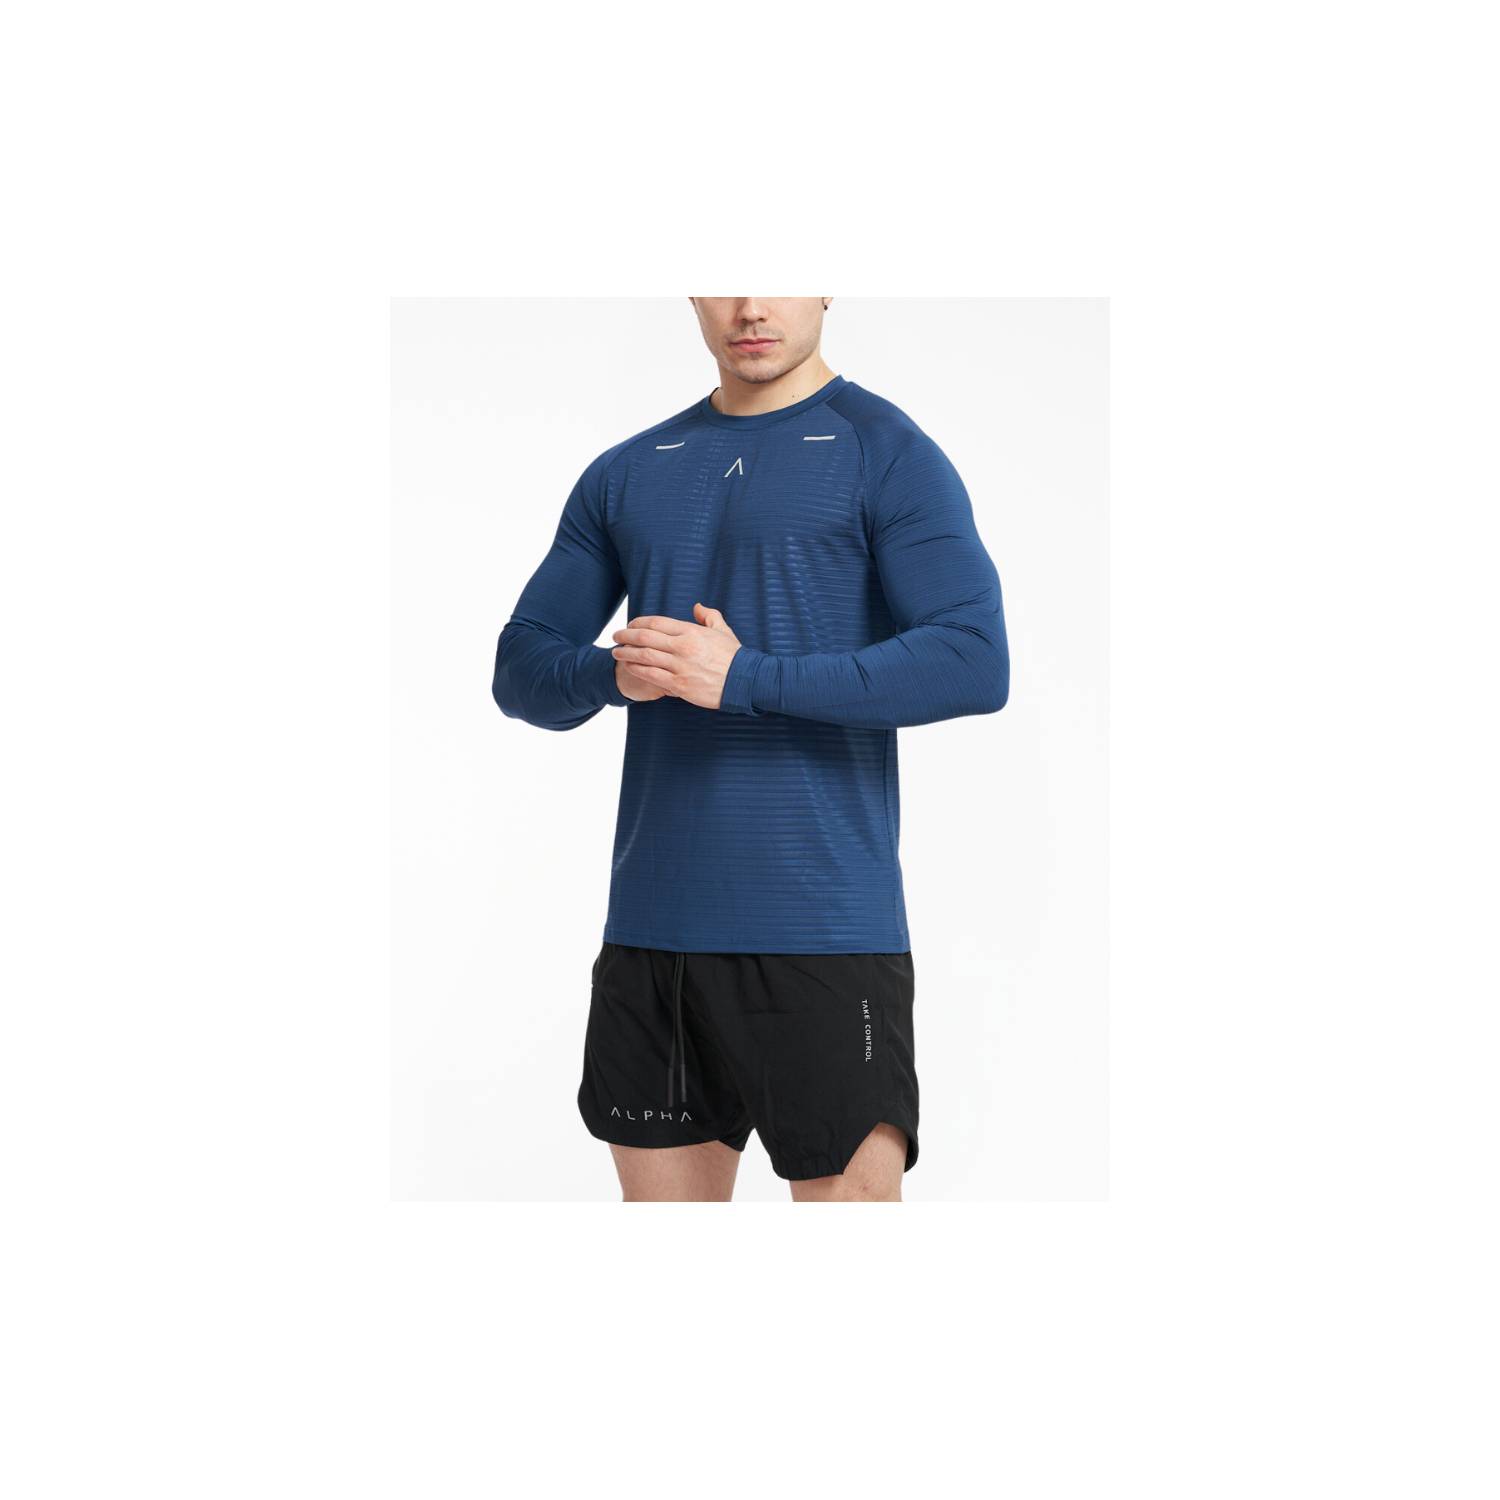 Polo Fit Deportivo Hombre - Ropa deportiva hombre - Ropa gym ALPHA